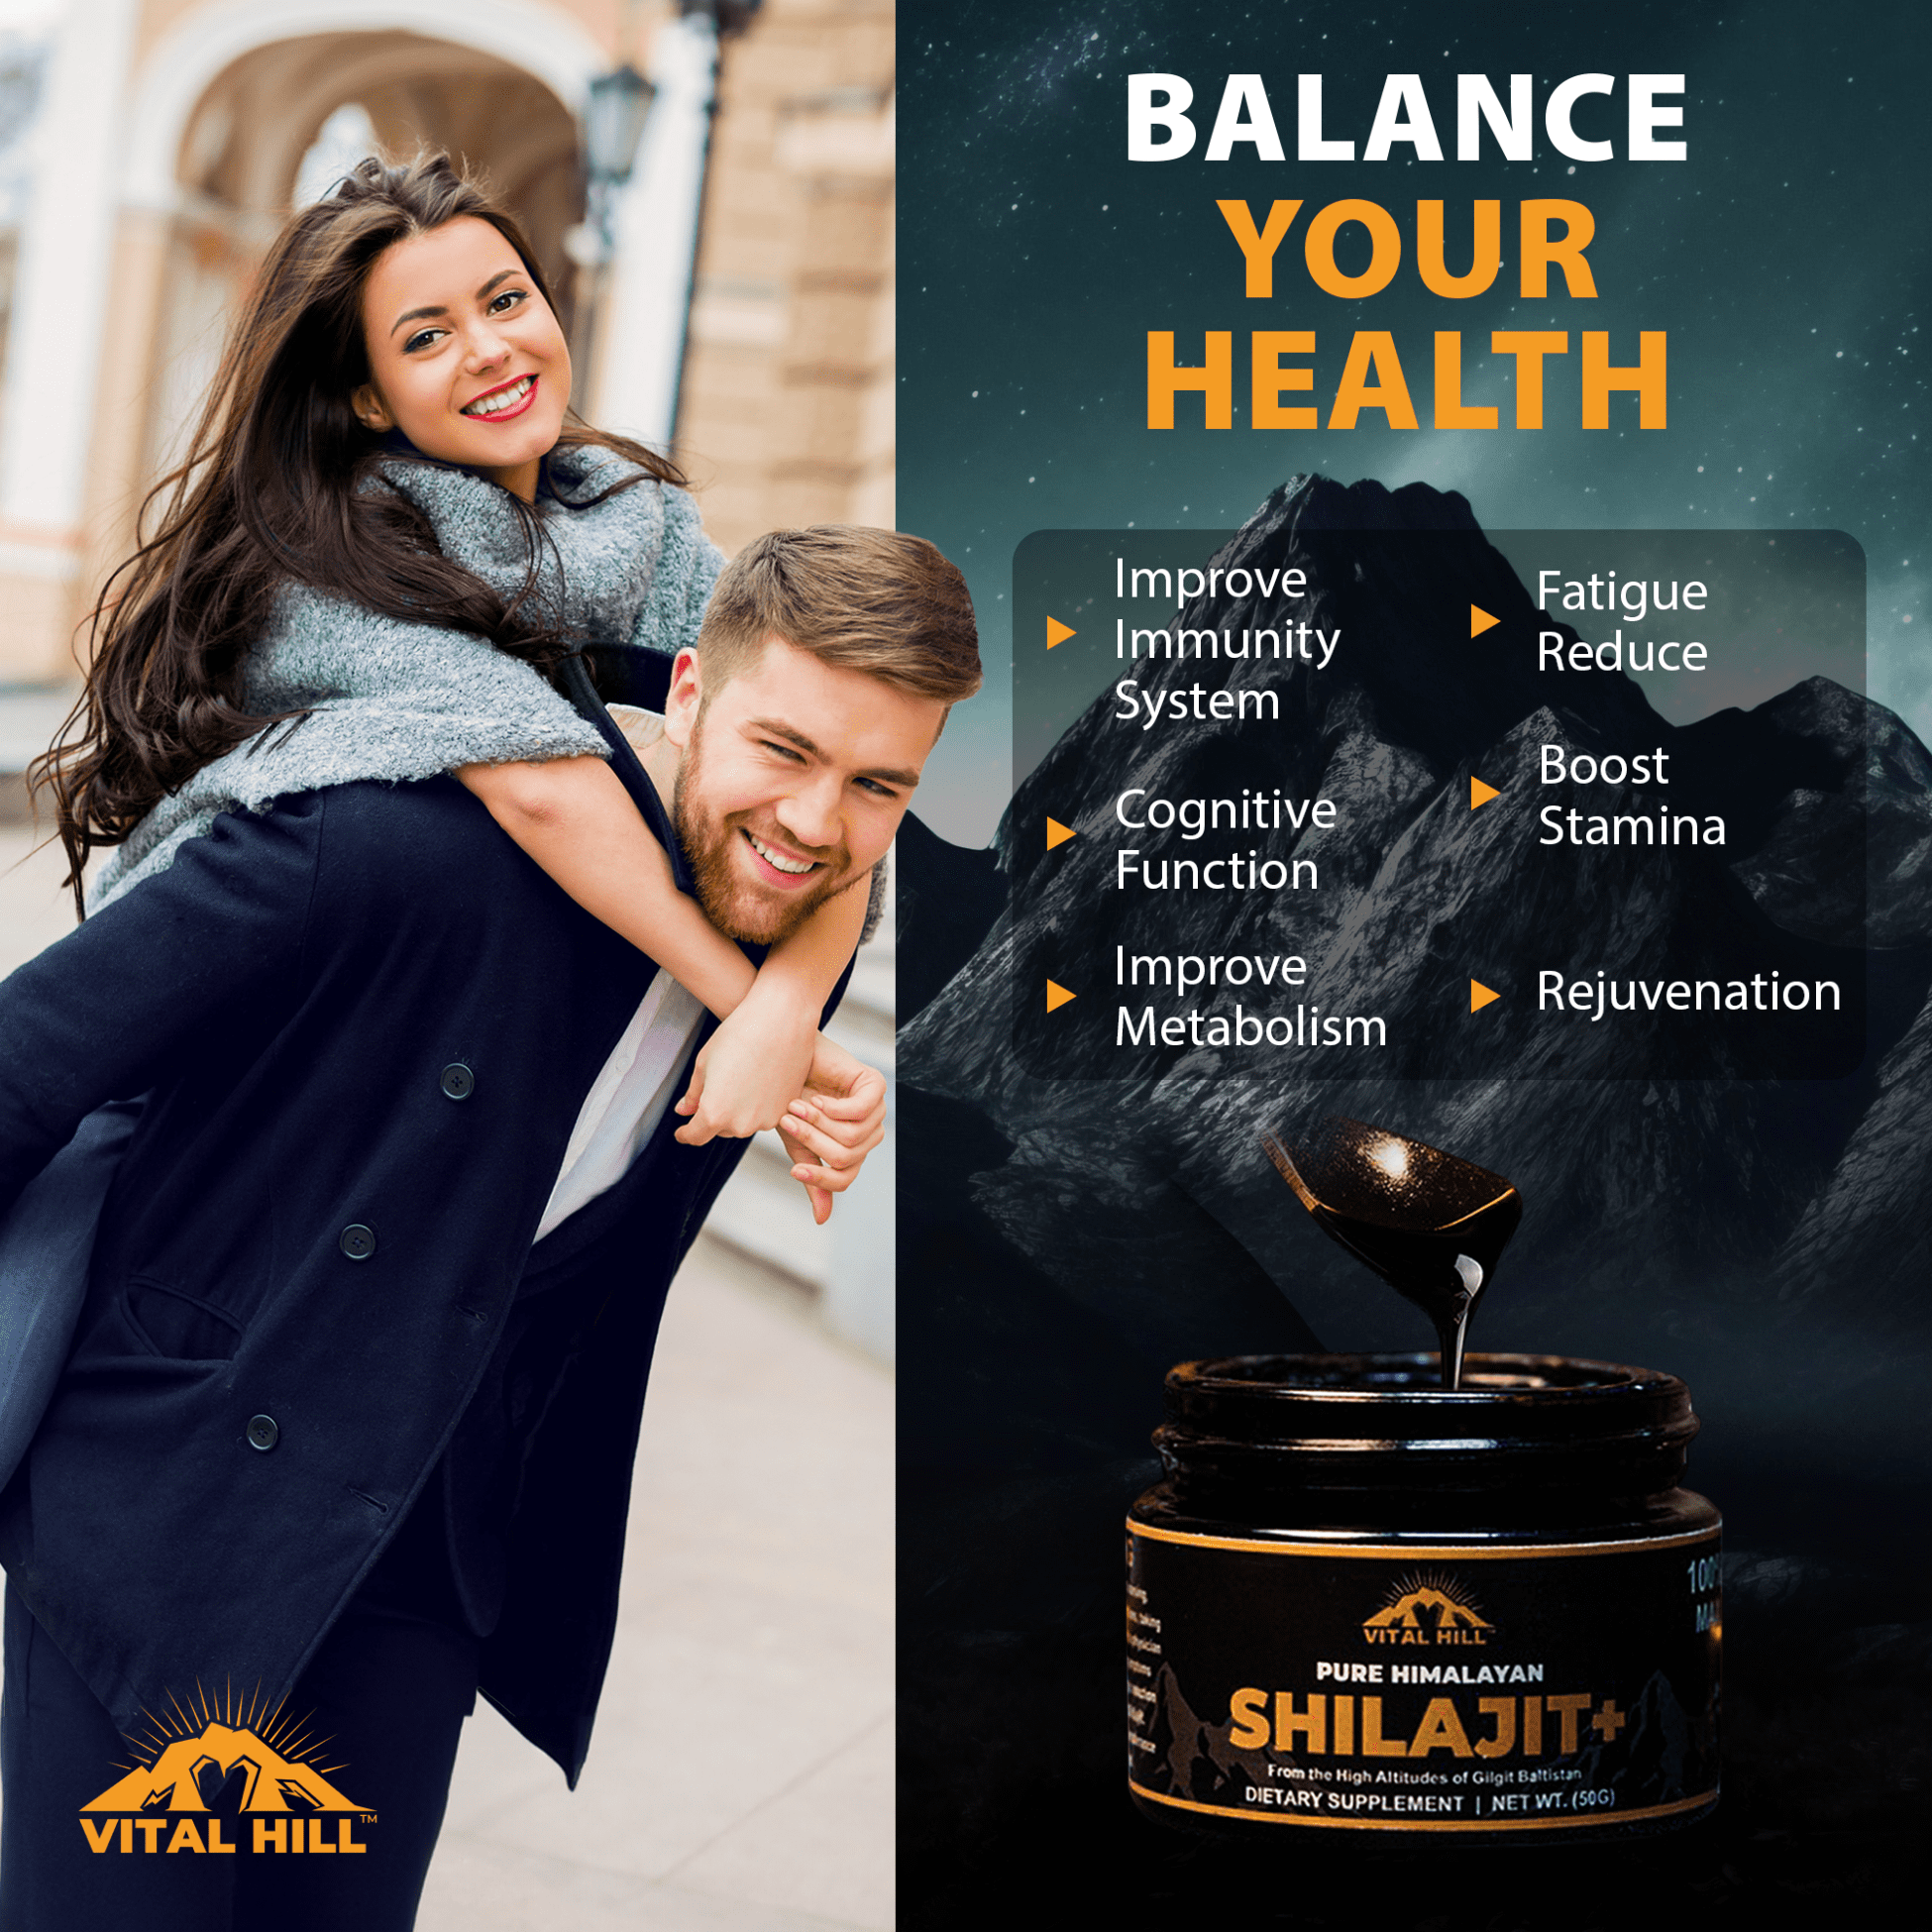 Balance you health with Vital Hill Shilajit. It Improve Immunity Support. Reduce Fatigue. Cognitive Function. Boosts Stamina. Improve Metabolism. Rejuvenation